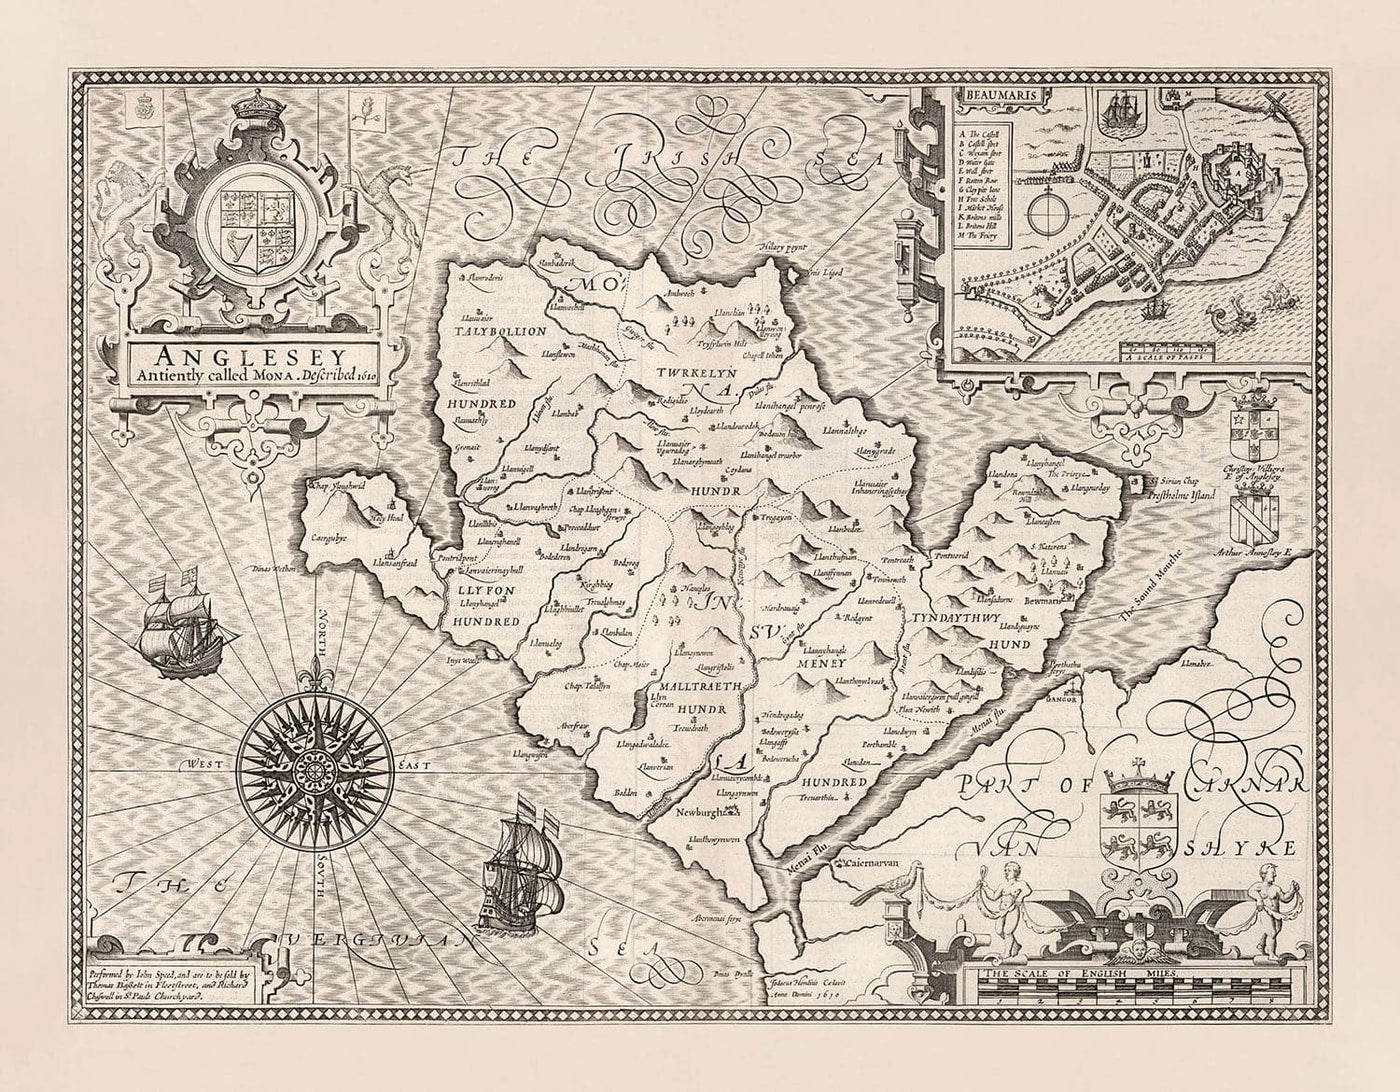 Old Monochrome Map of Anglesey, Wales, 1611 by John Speed - Holyhead, Llanfairpwllgwyngyll, Bangor